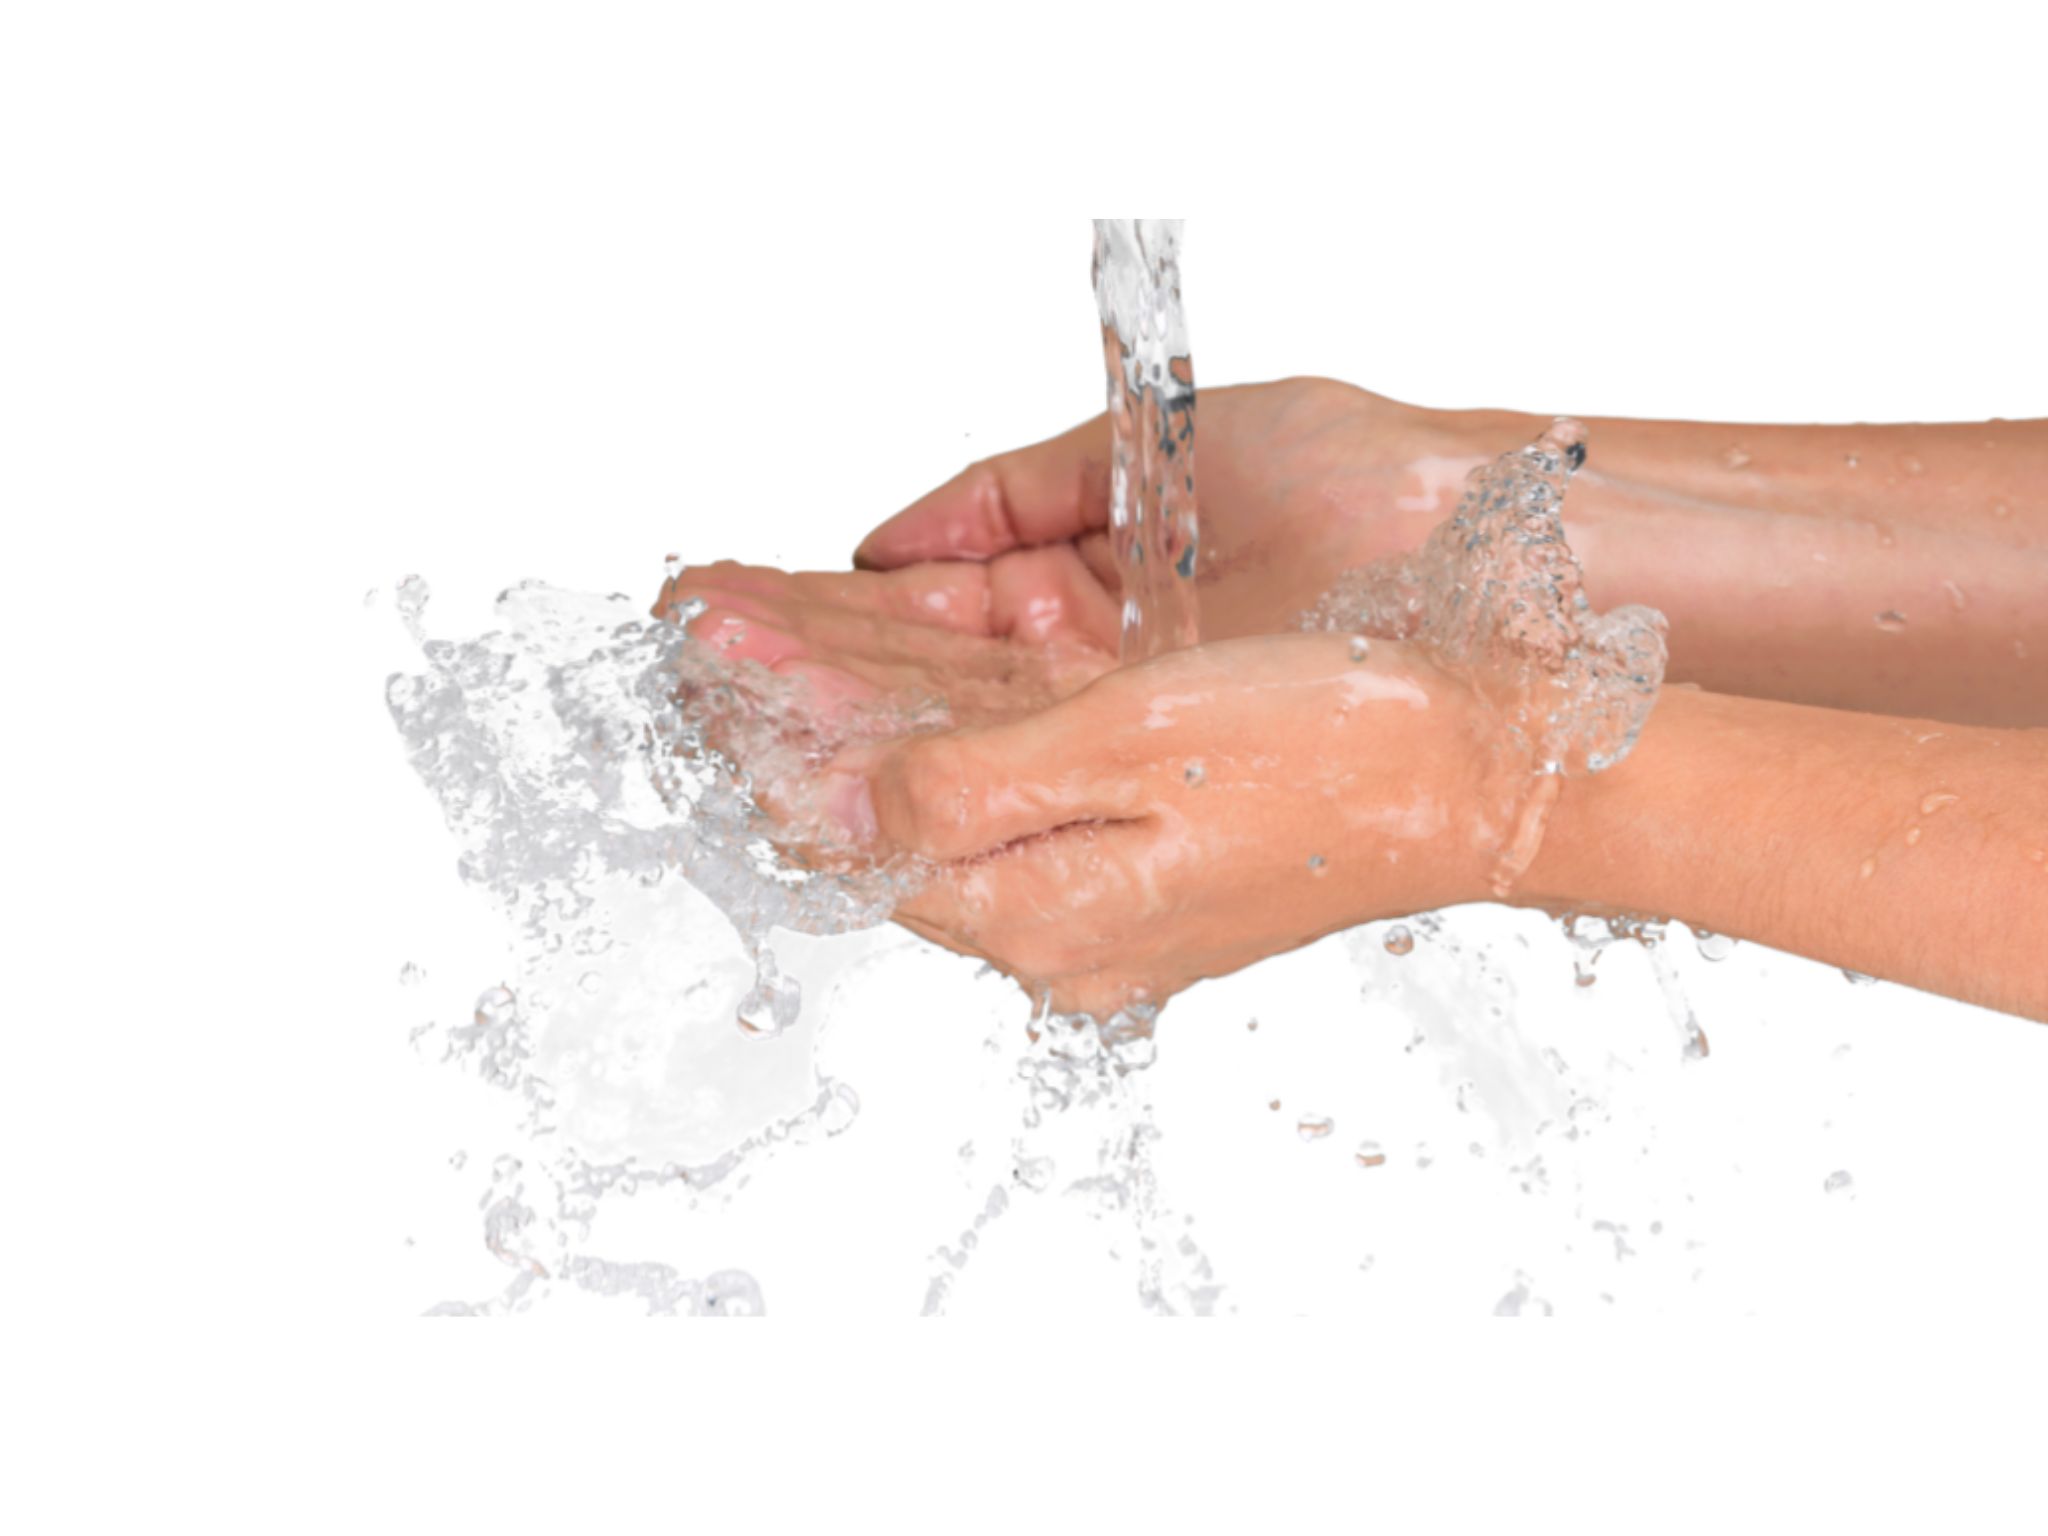 Water being poured onto a pair of cupped hands